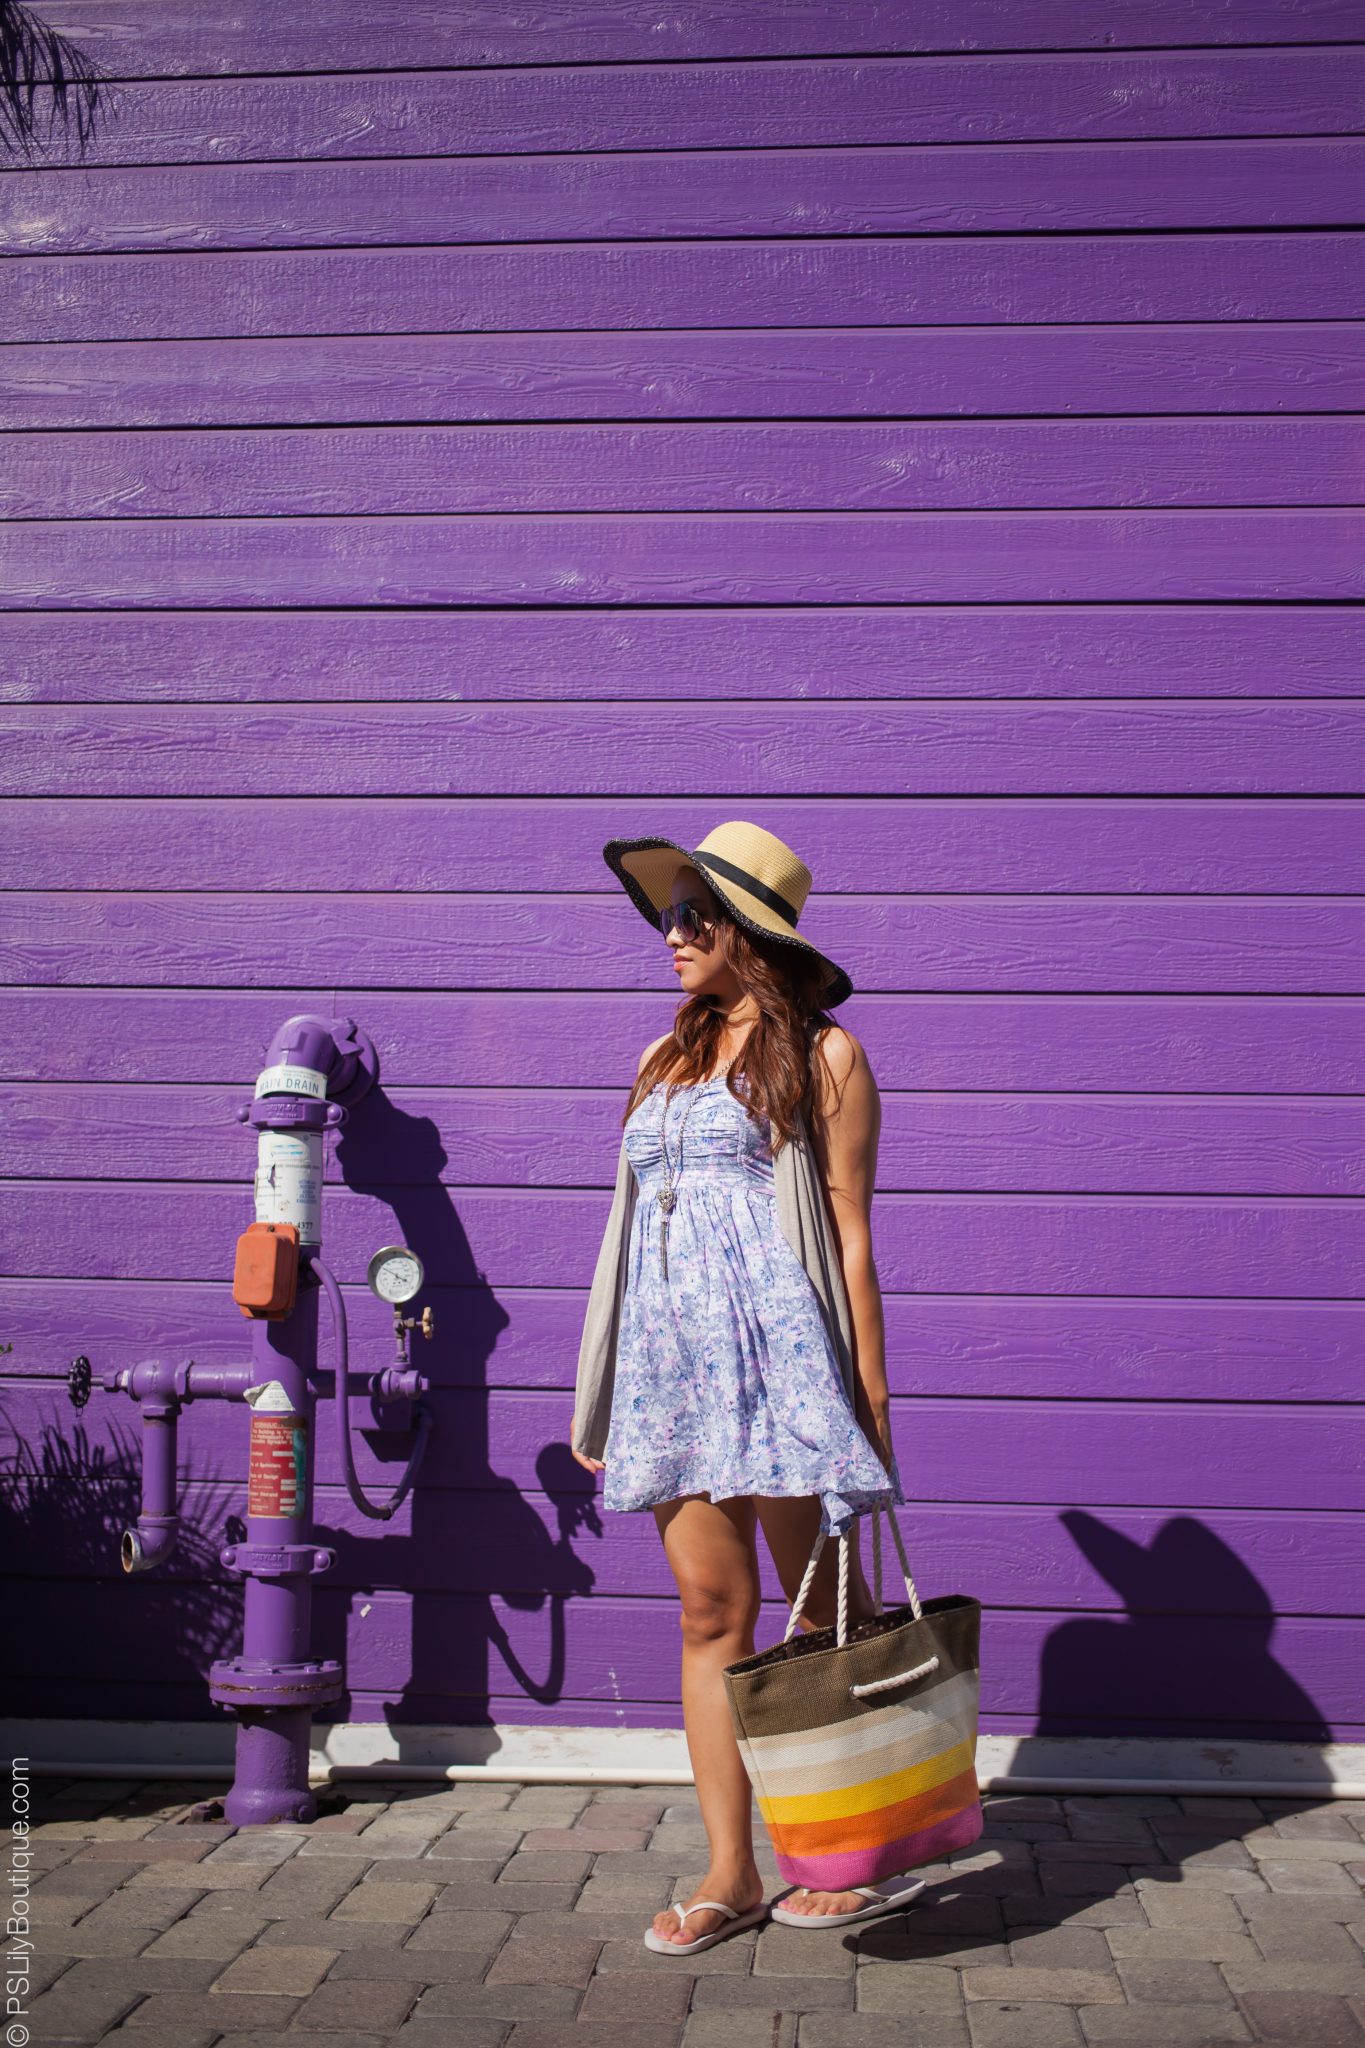 tweet-pslilyboutique-los-angeles-fashion-blogger-david-and-young-beige-black-floppy-hat-ootd-purple-wall-10-10-15